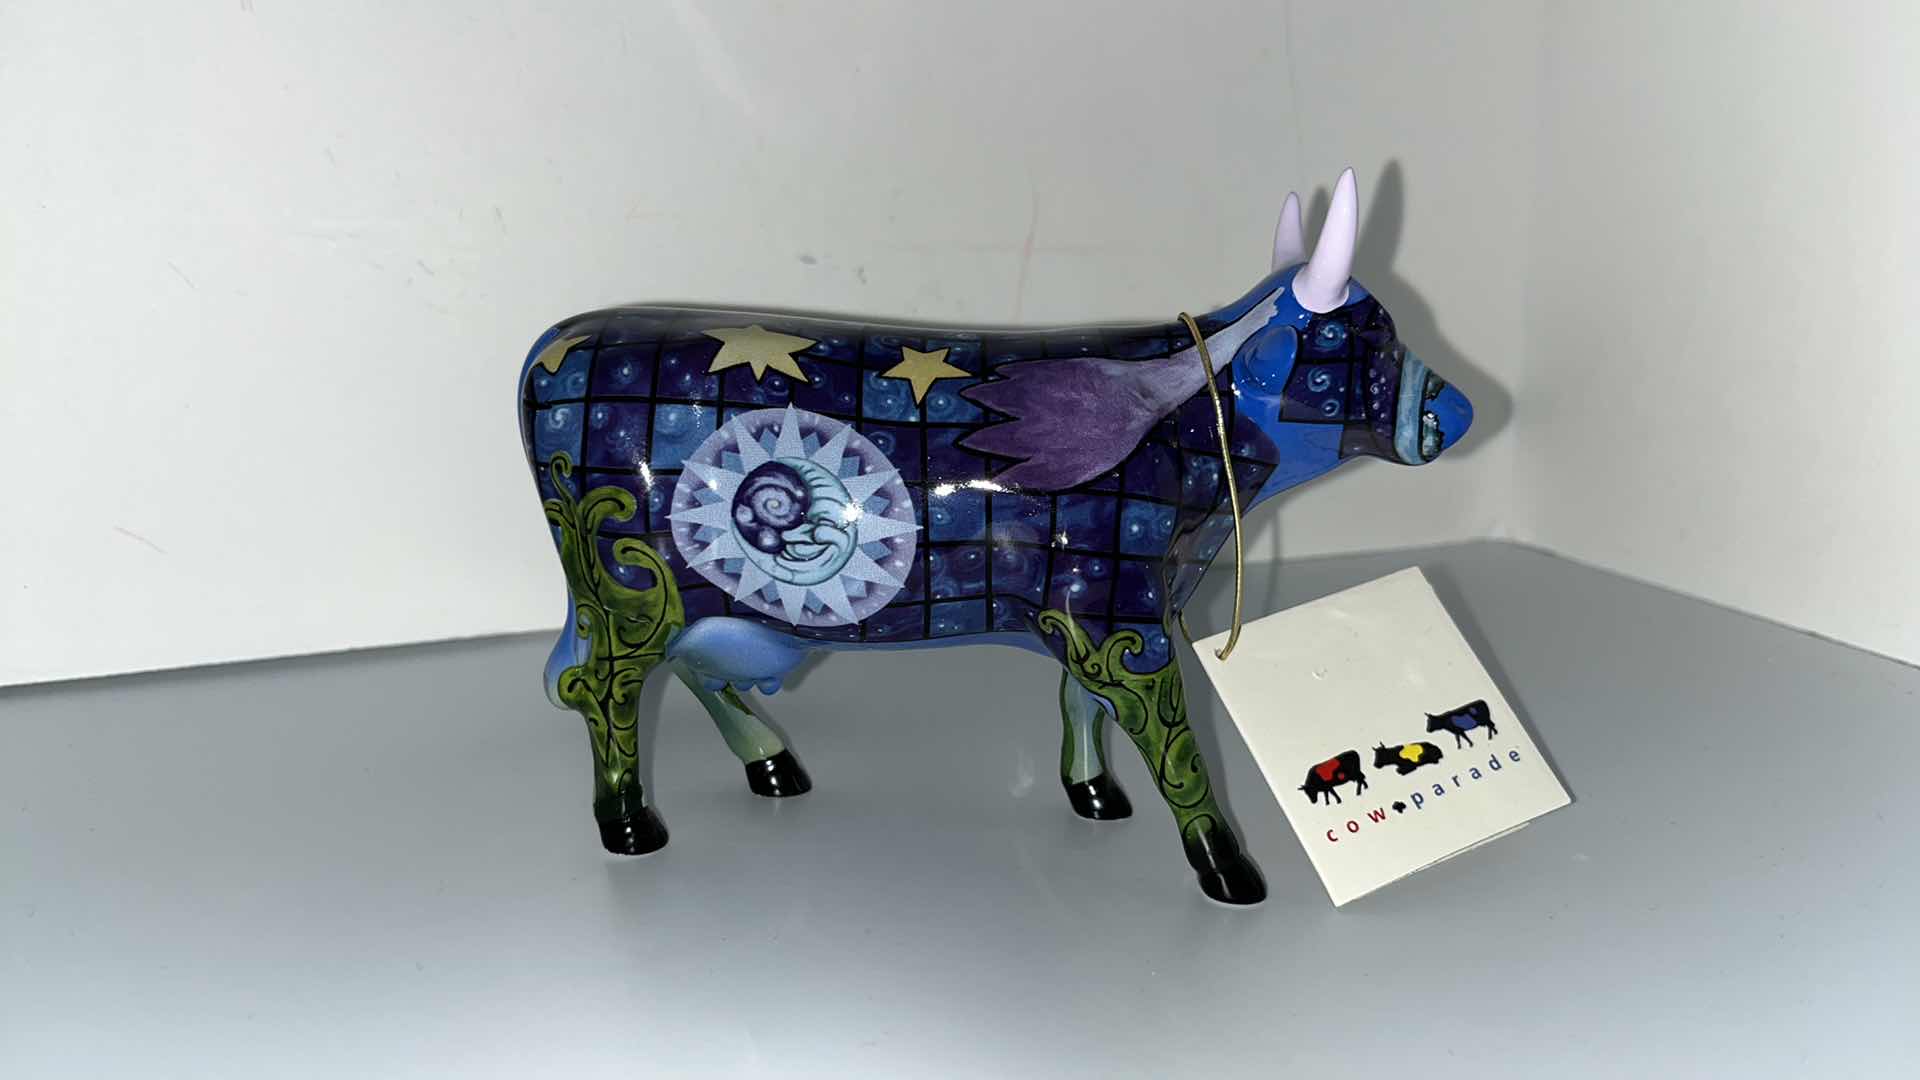 Photo 2 of WESTLAND GIFTWARE COW PARADE INFINITY COW FIGURINE 2001 (9191)